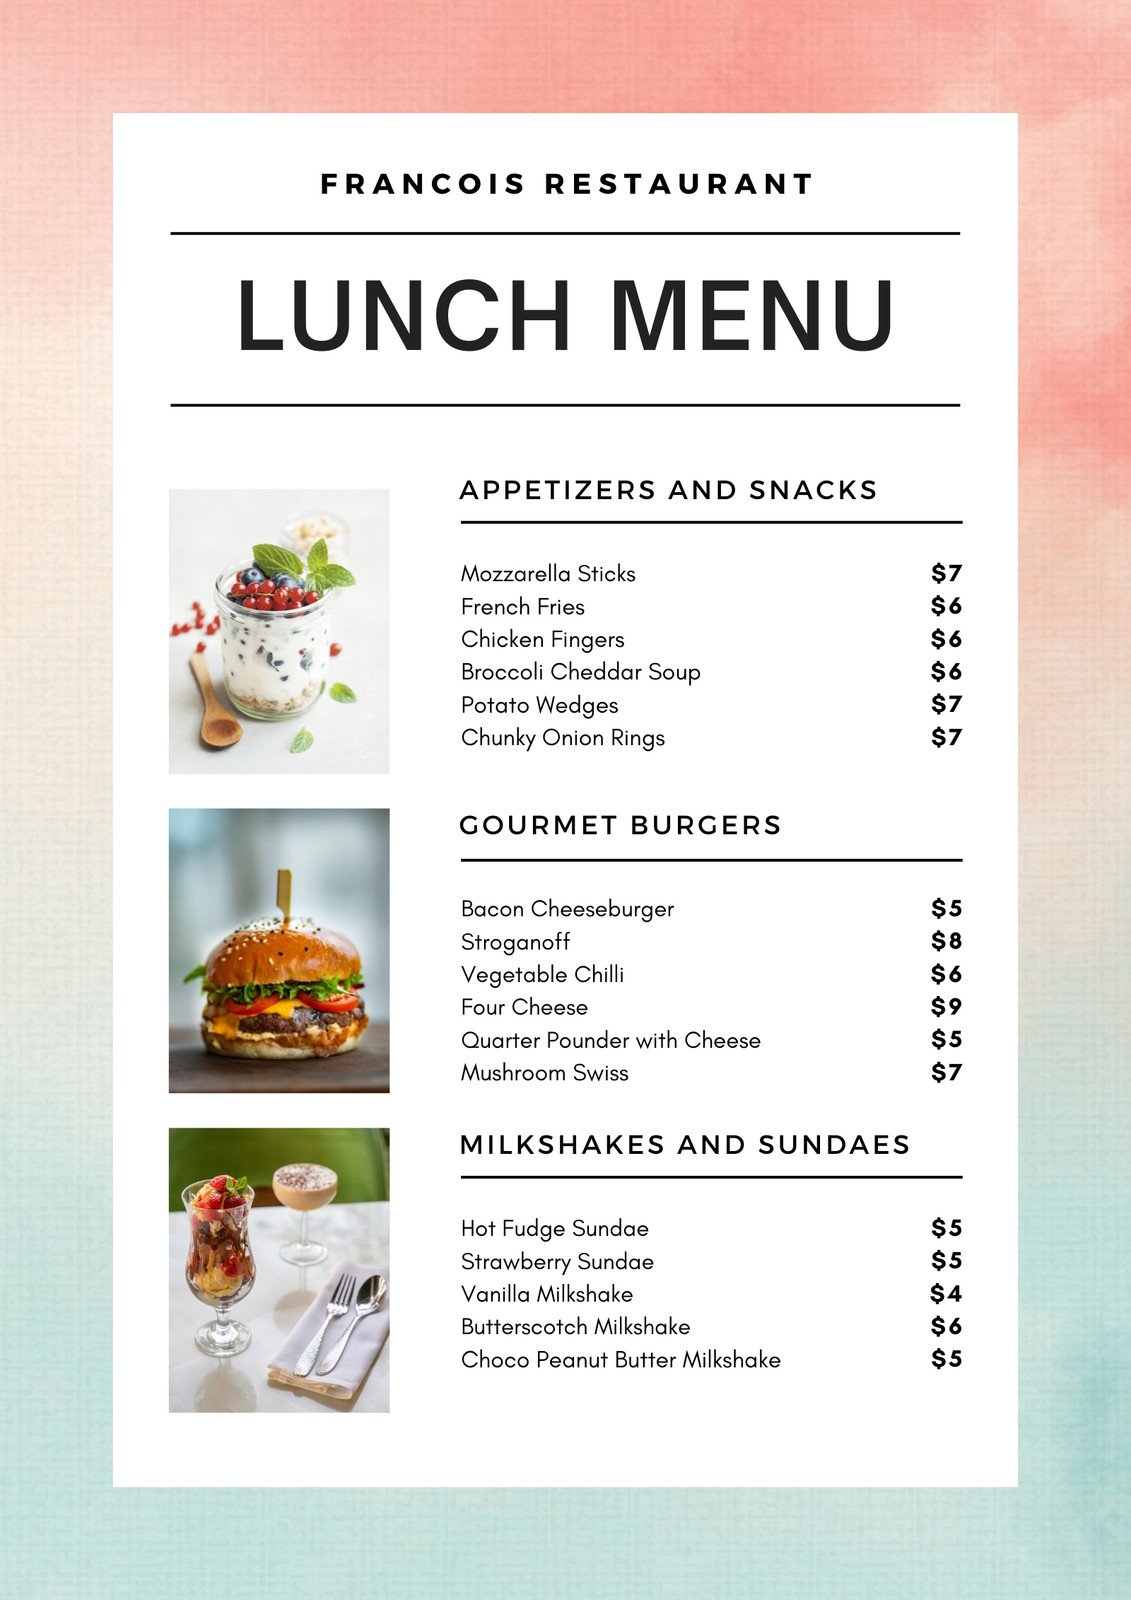 Free printable and customizable catering menu templates | Canva